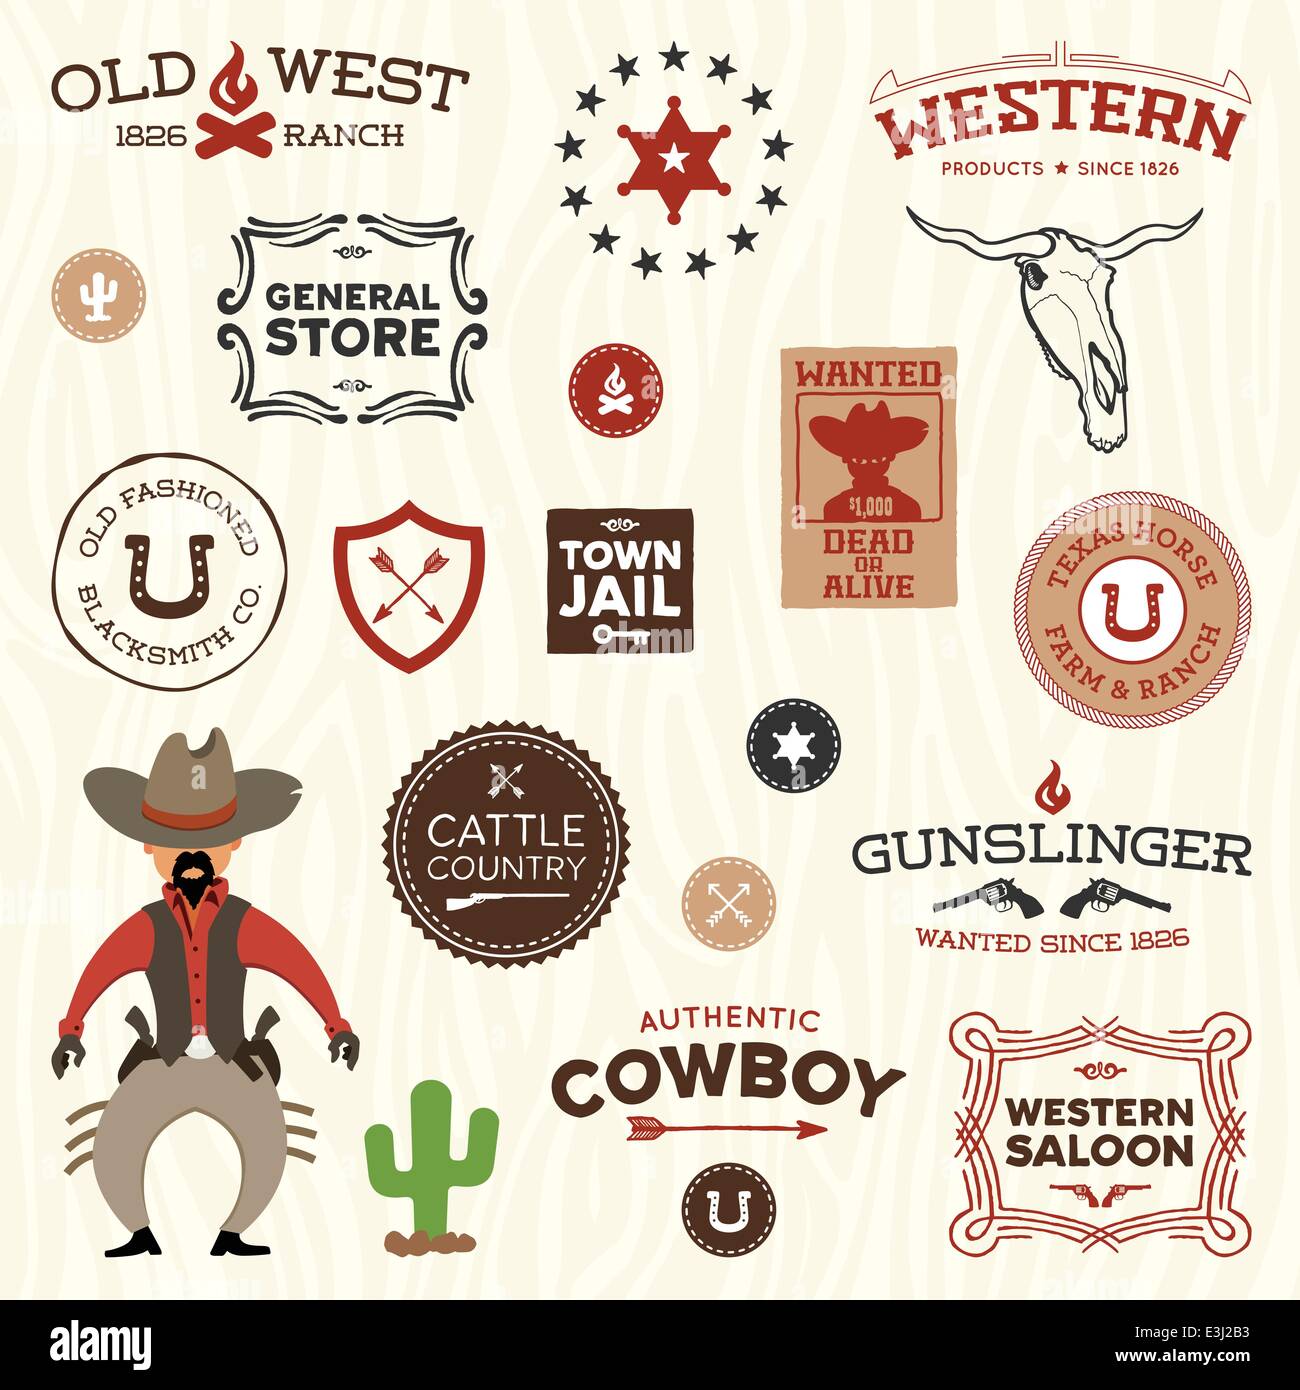 Vintage American old west western designs and graphics Stock Vector